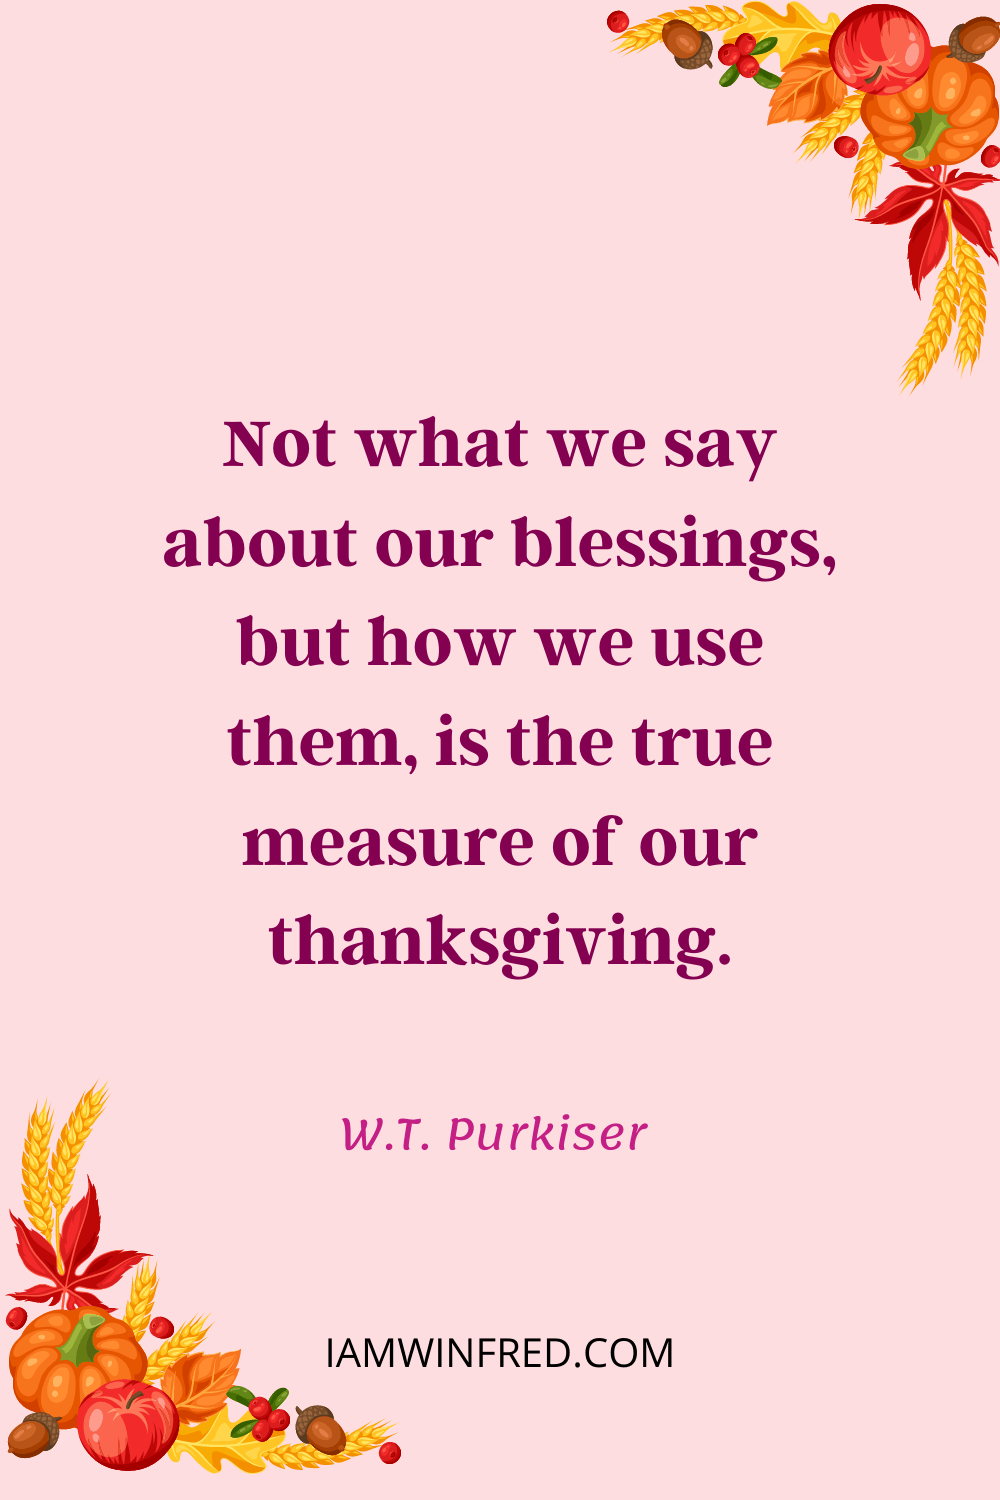 Not What We Say About Our Blessings But How We Use Them Is The True Measure Of Our Thanksgiving.